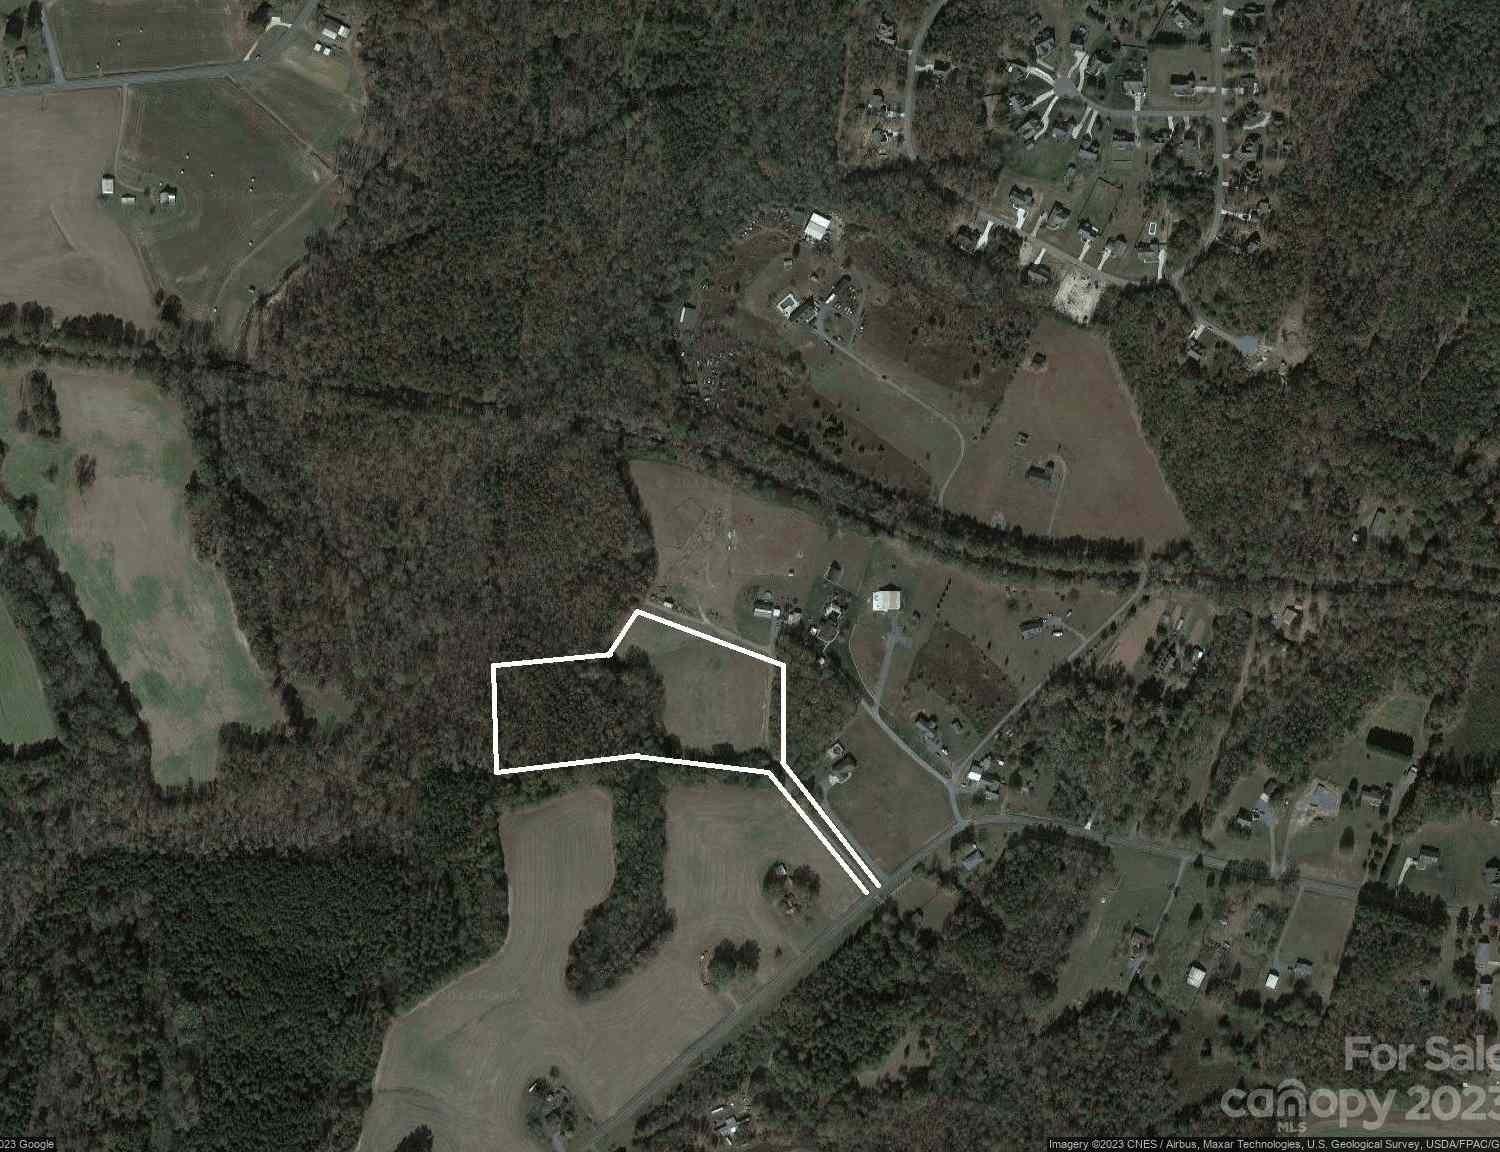 Stanly County, NC Small Farms for Sale - LandSearch